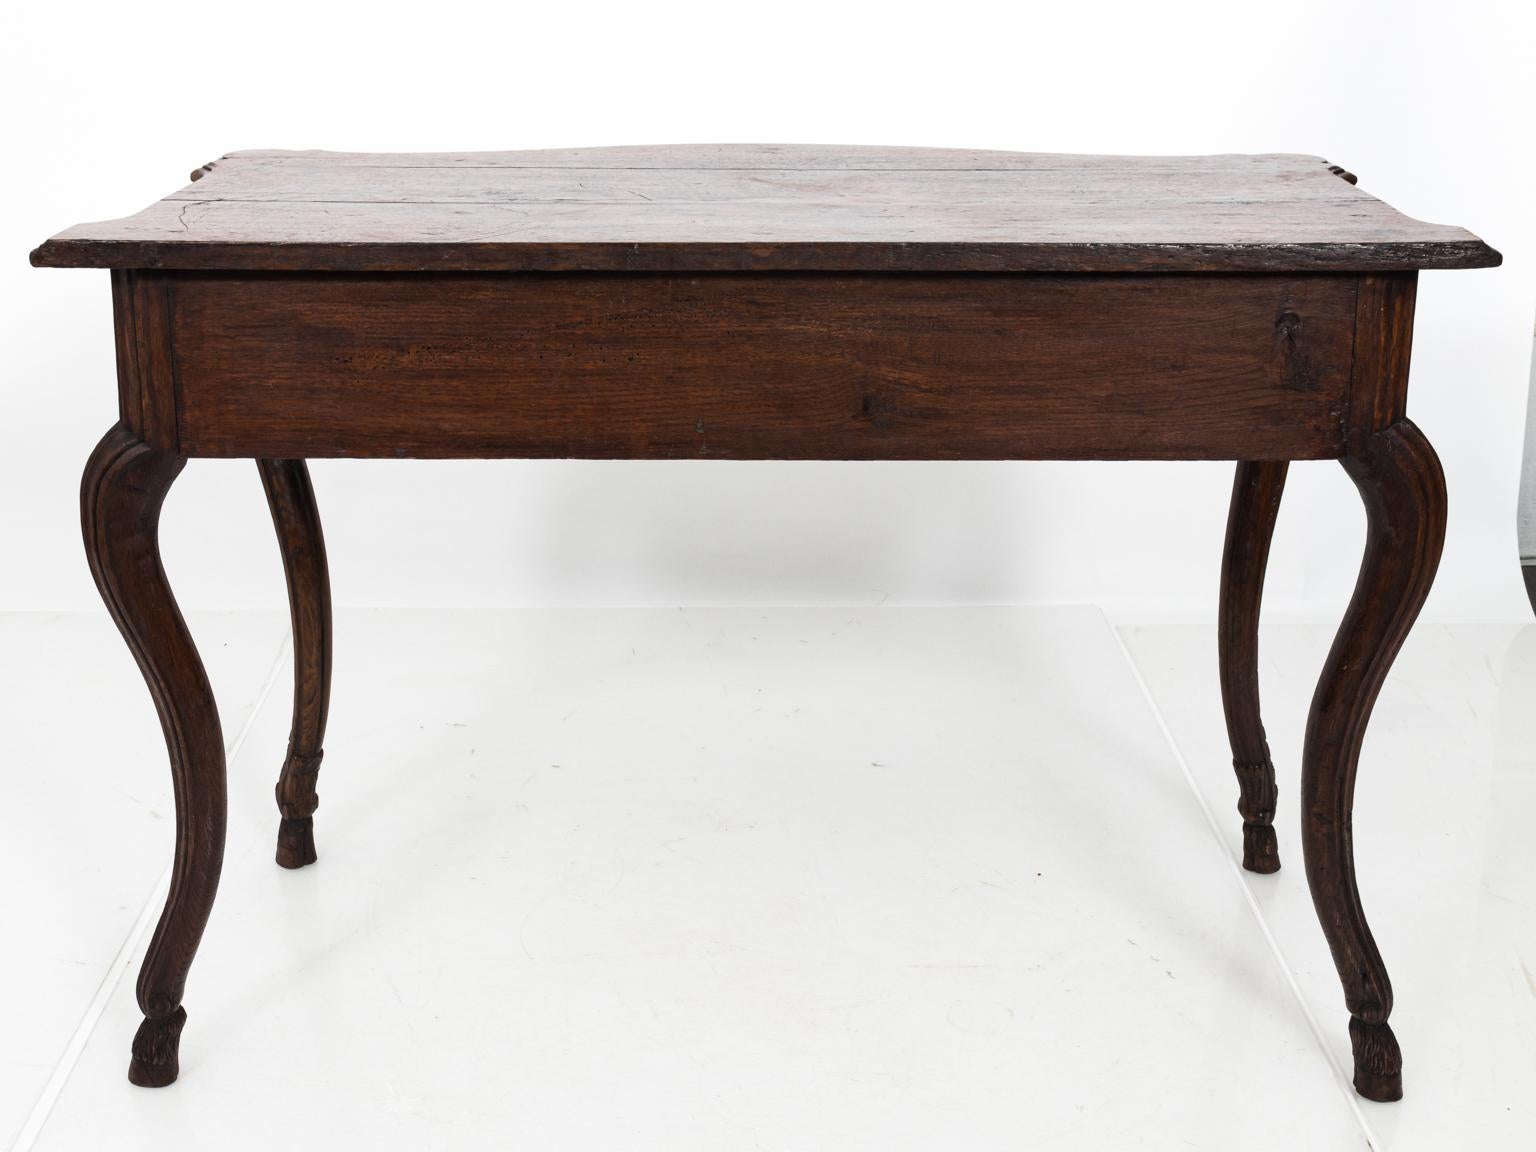 Louis XV oakwood console table with cabriole legs, carved hoof feet, and brass hardware, circa 18th century. Please note of wear consistent with age including a water stain and gaping in the wood on the tabletop.